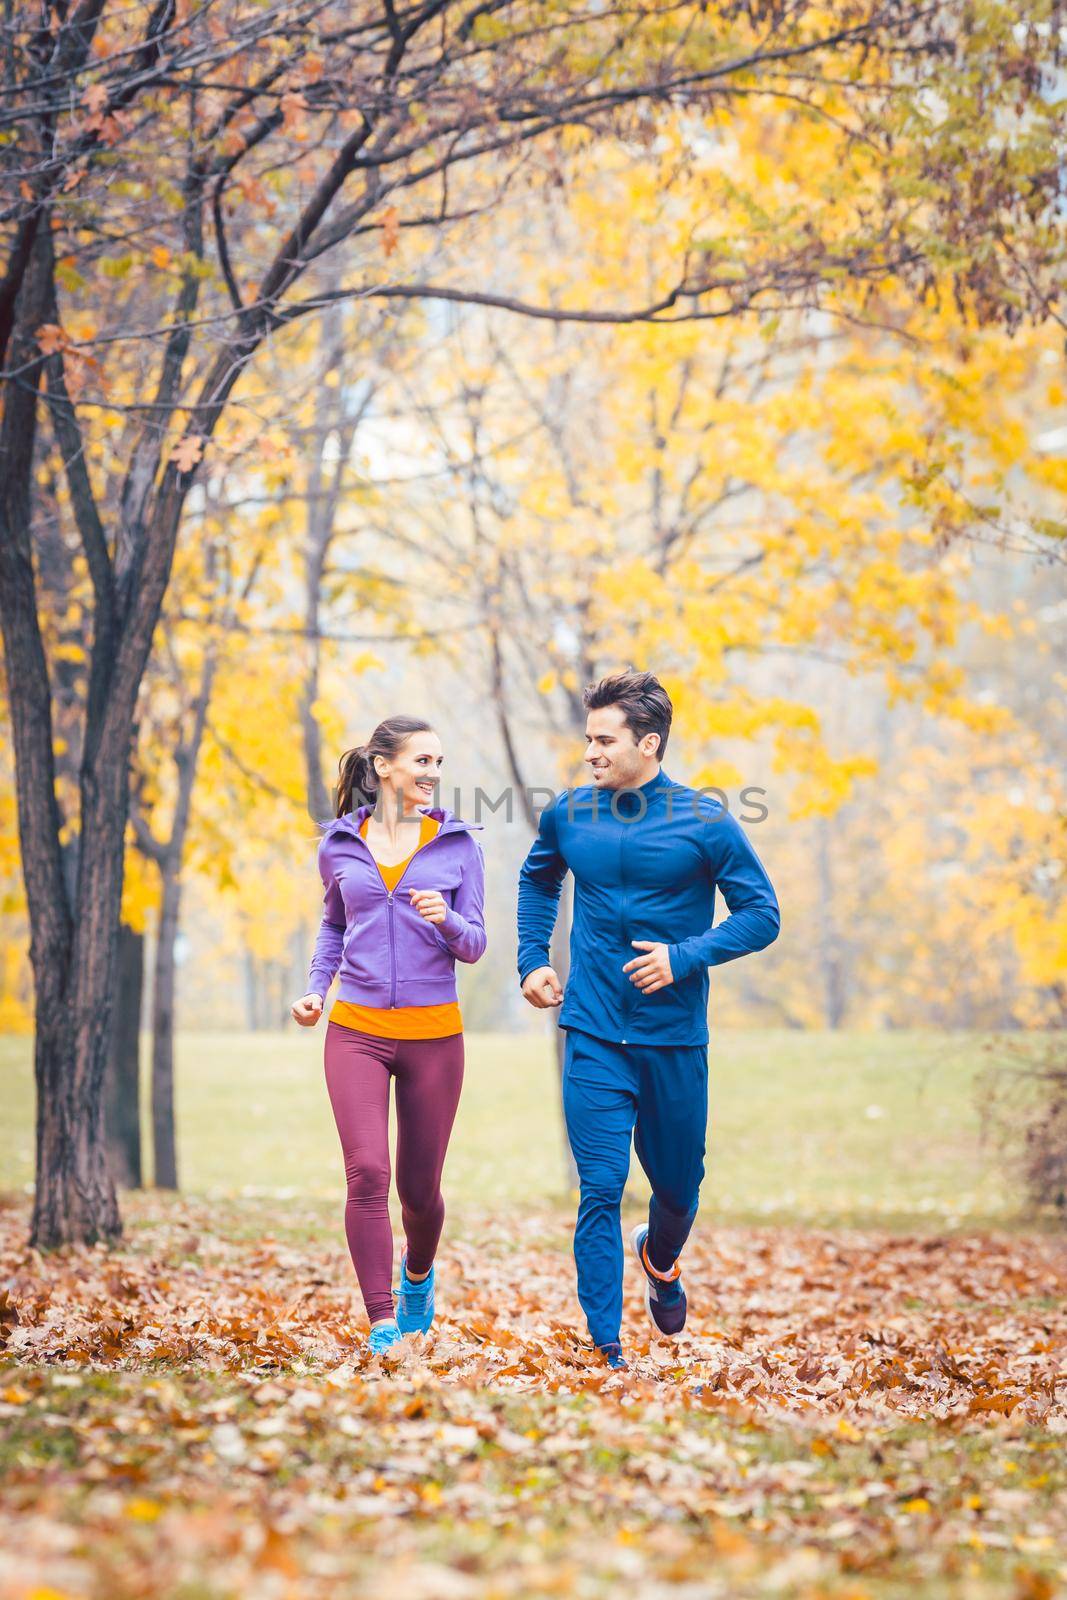 Man and woman running as fitness sport in an autumn park by Kzenon